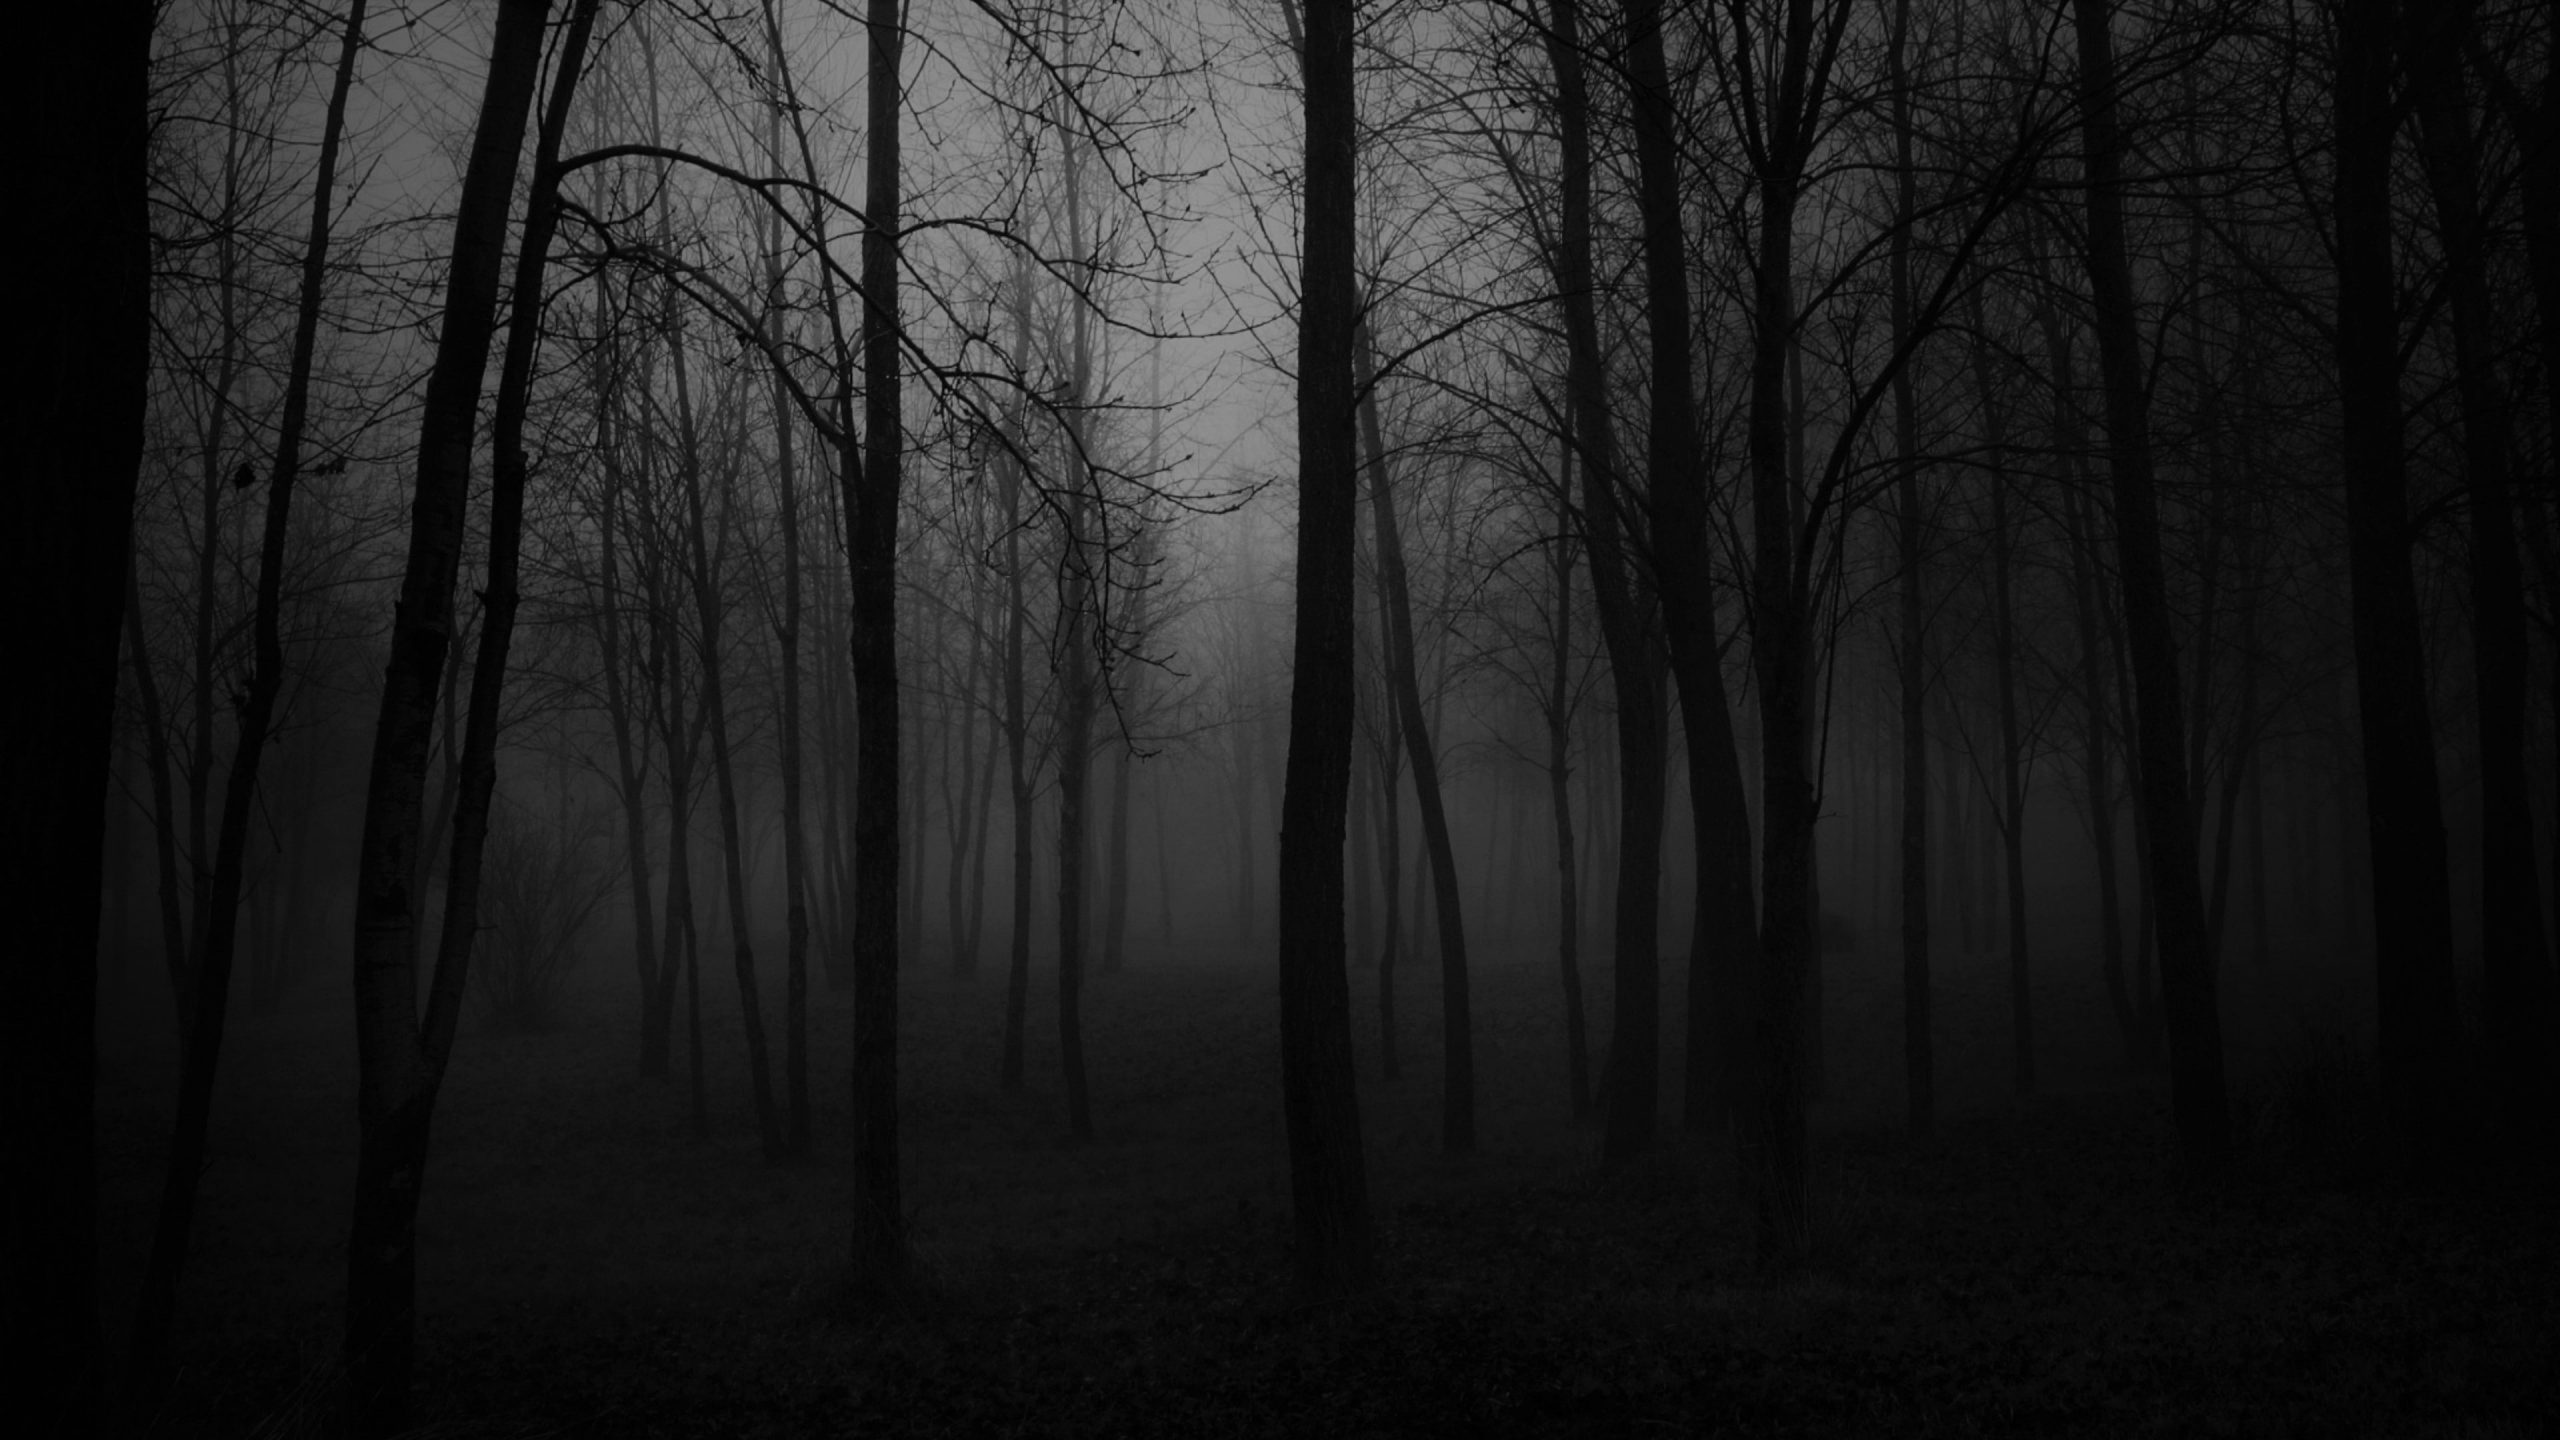 Wallpaper Black, Black And White, Forest, Nature, Foggy - Wallpaperforu